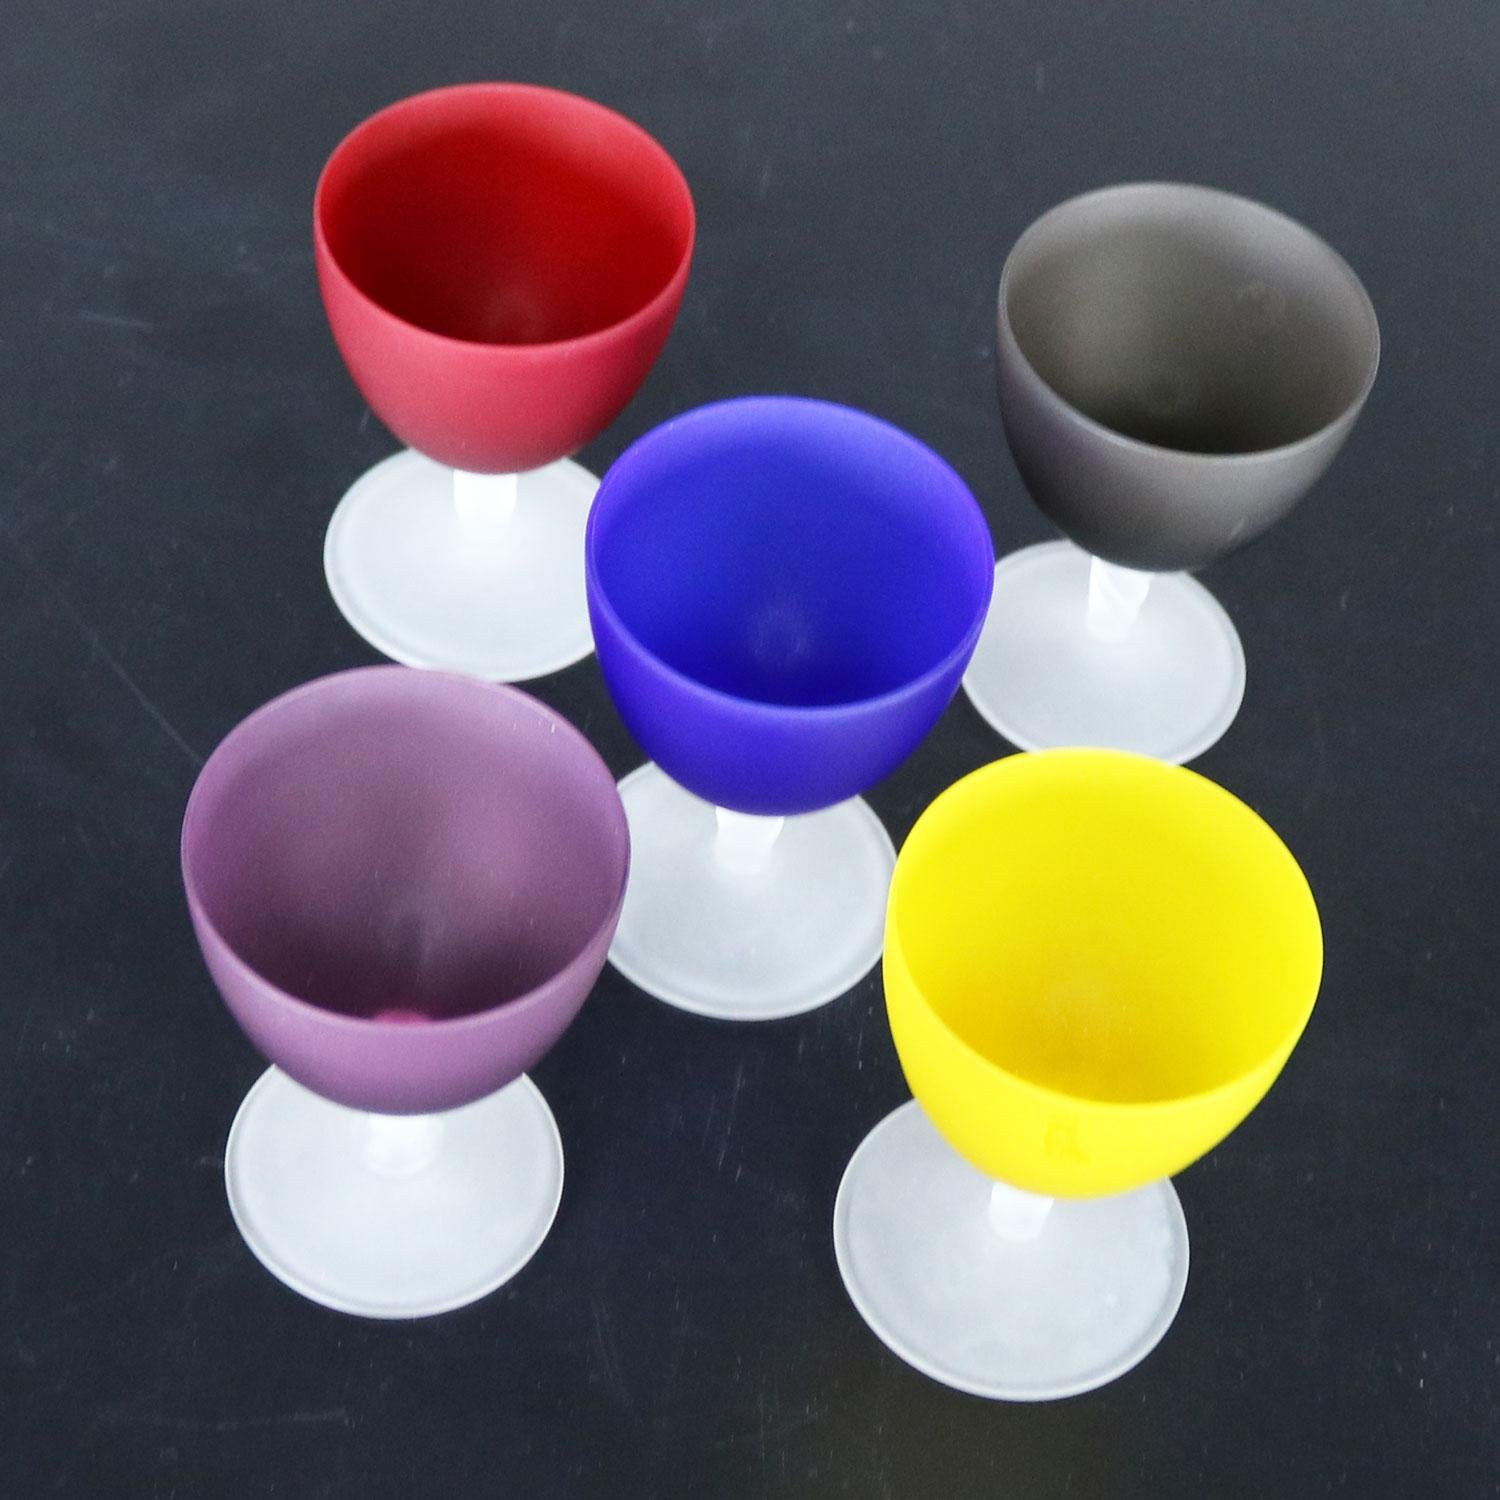 Set of 5 Small Multicolored Frosted Glass Wine Coupes or Cordial Glasses 2